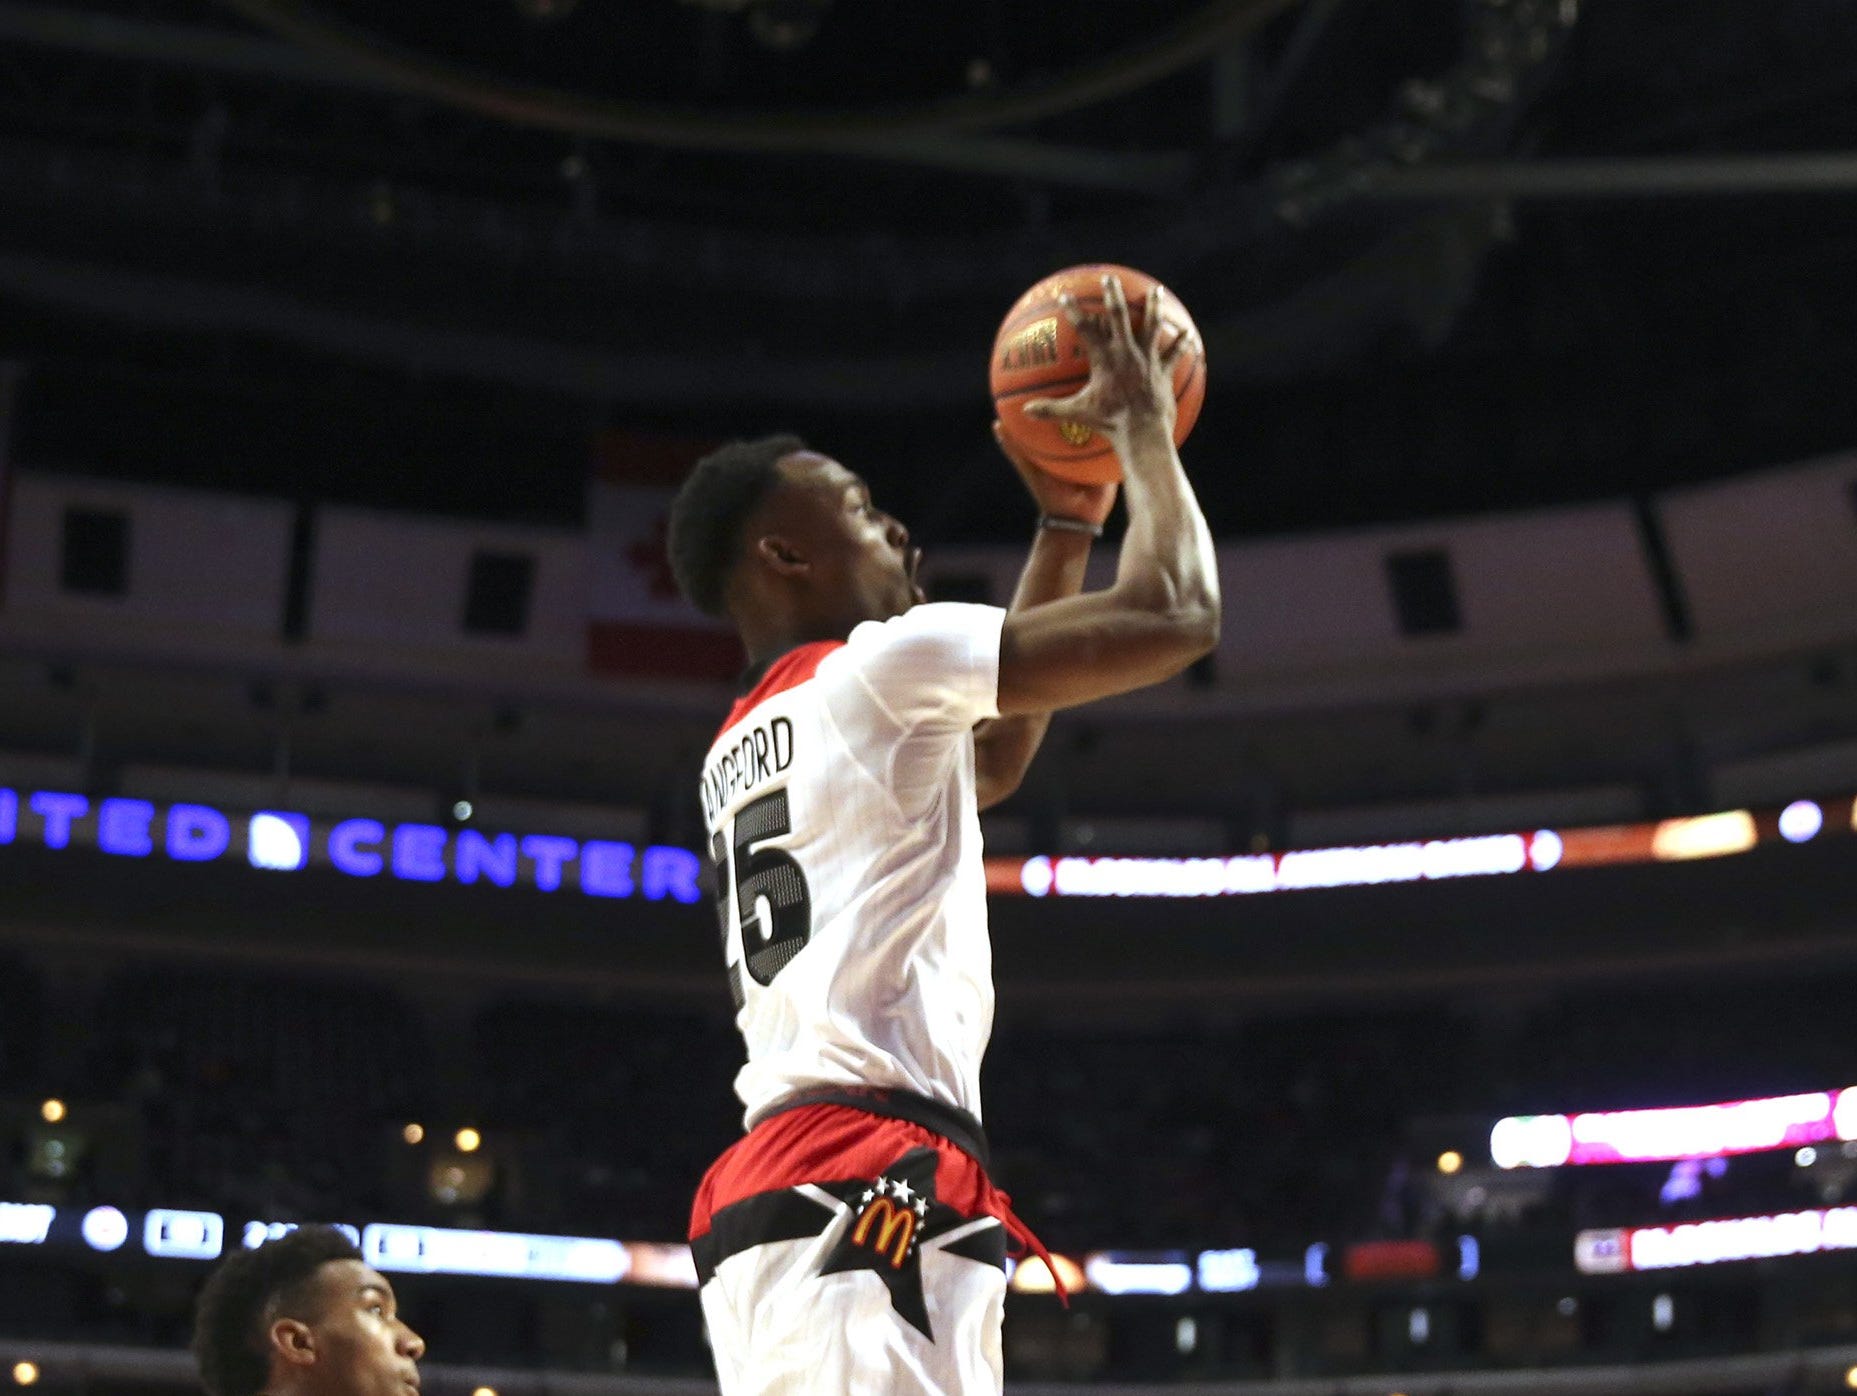 The West's Joshua Langford (25) goes to the basket against Team East during the first half of the McDonald's Boys All American game at the United Center in Chicago on Wednesday, March 30, 2016.